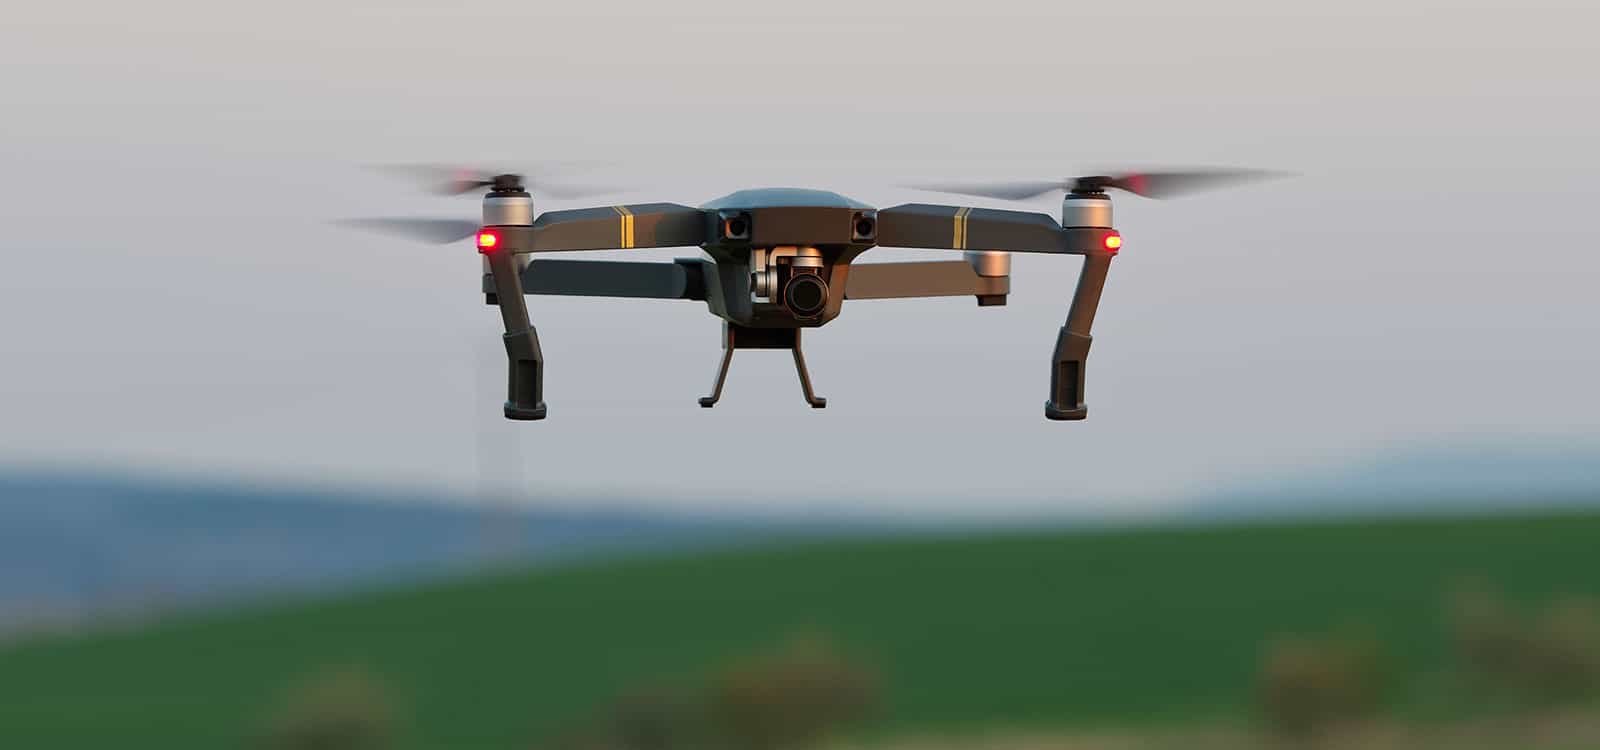 The New FAA Rules for Drones | Blog | Stockpile Reports